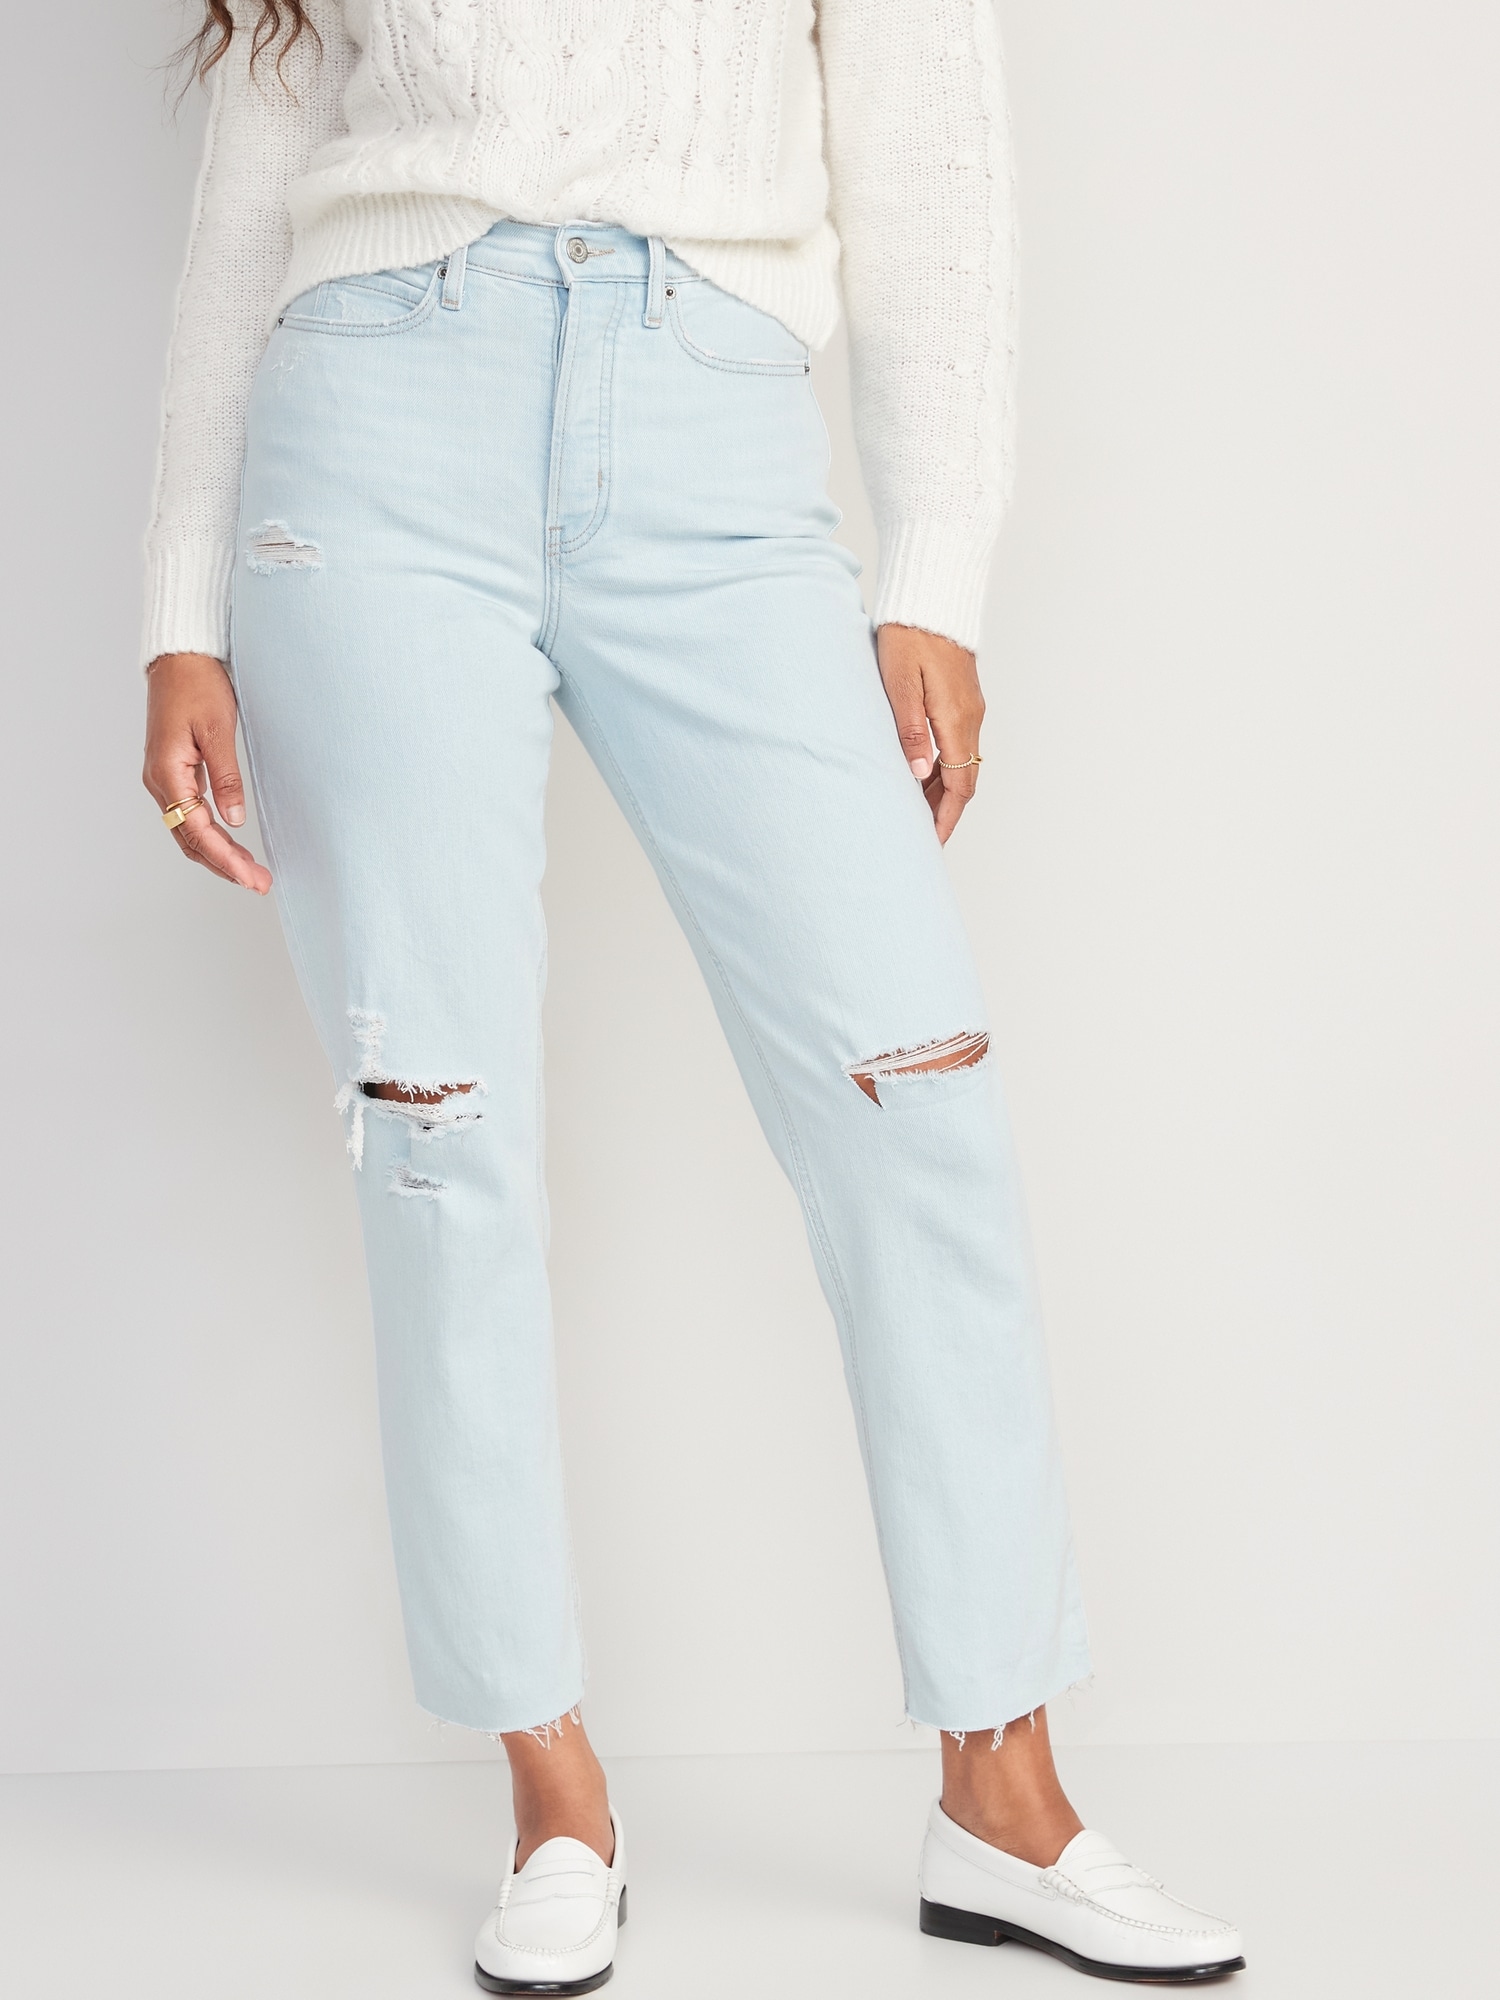 Curvy Extra High-Waisted Button-Fly Sky-Hi Straight Ripped Cut-Off Jeans